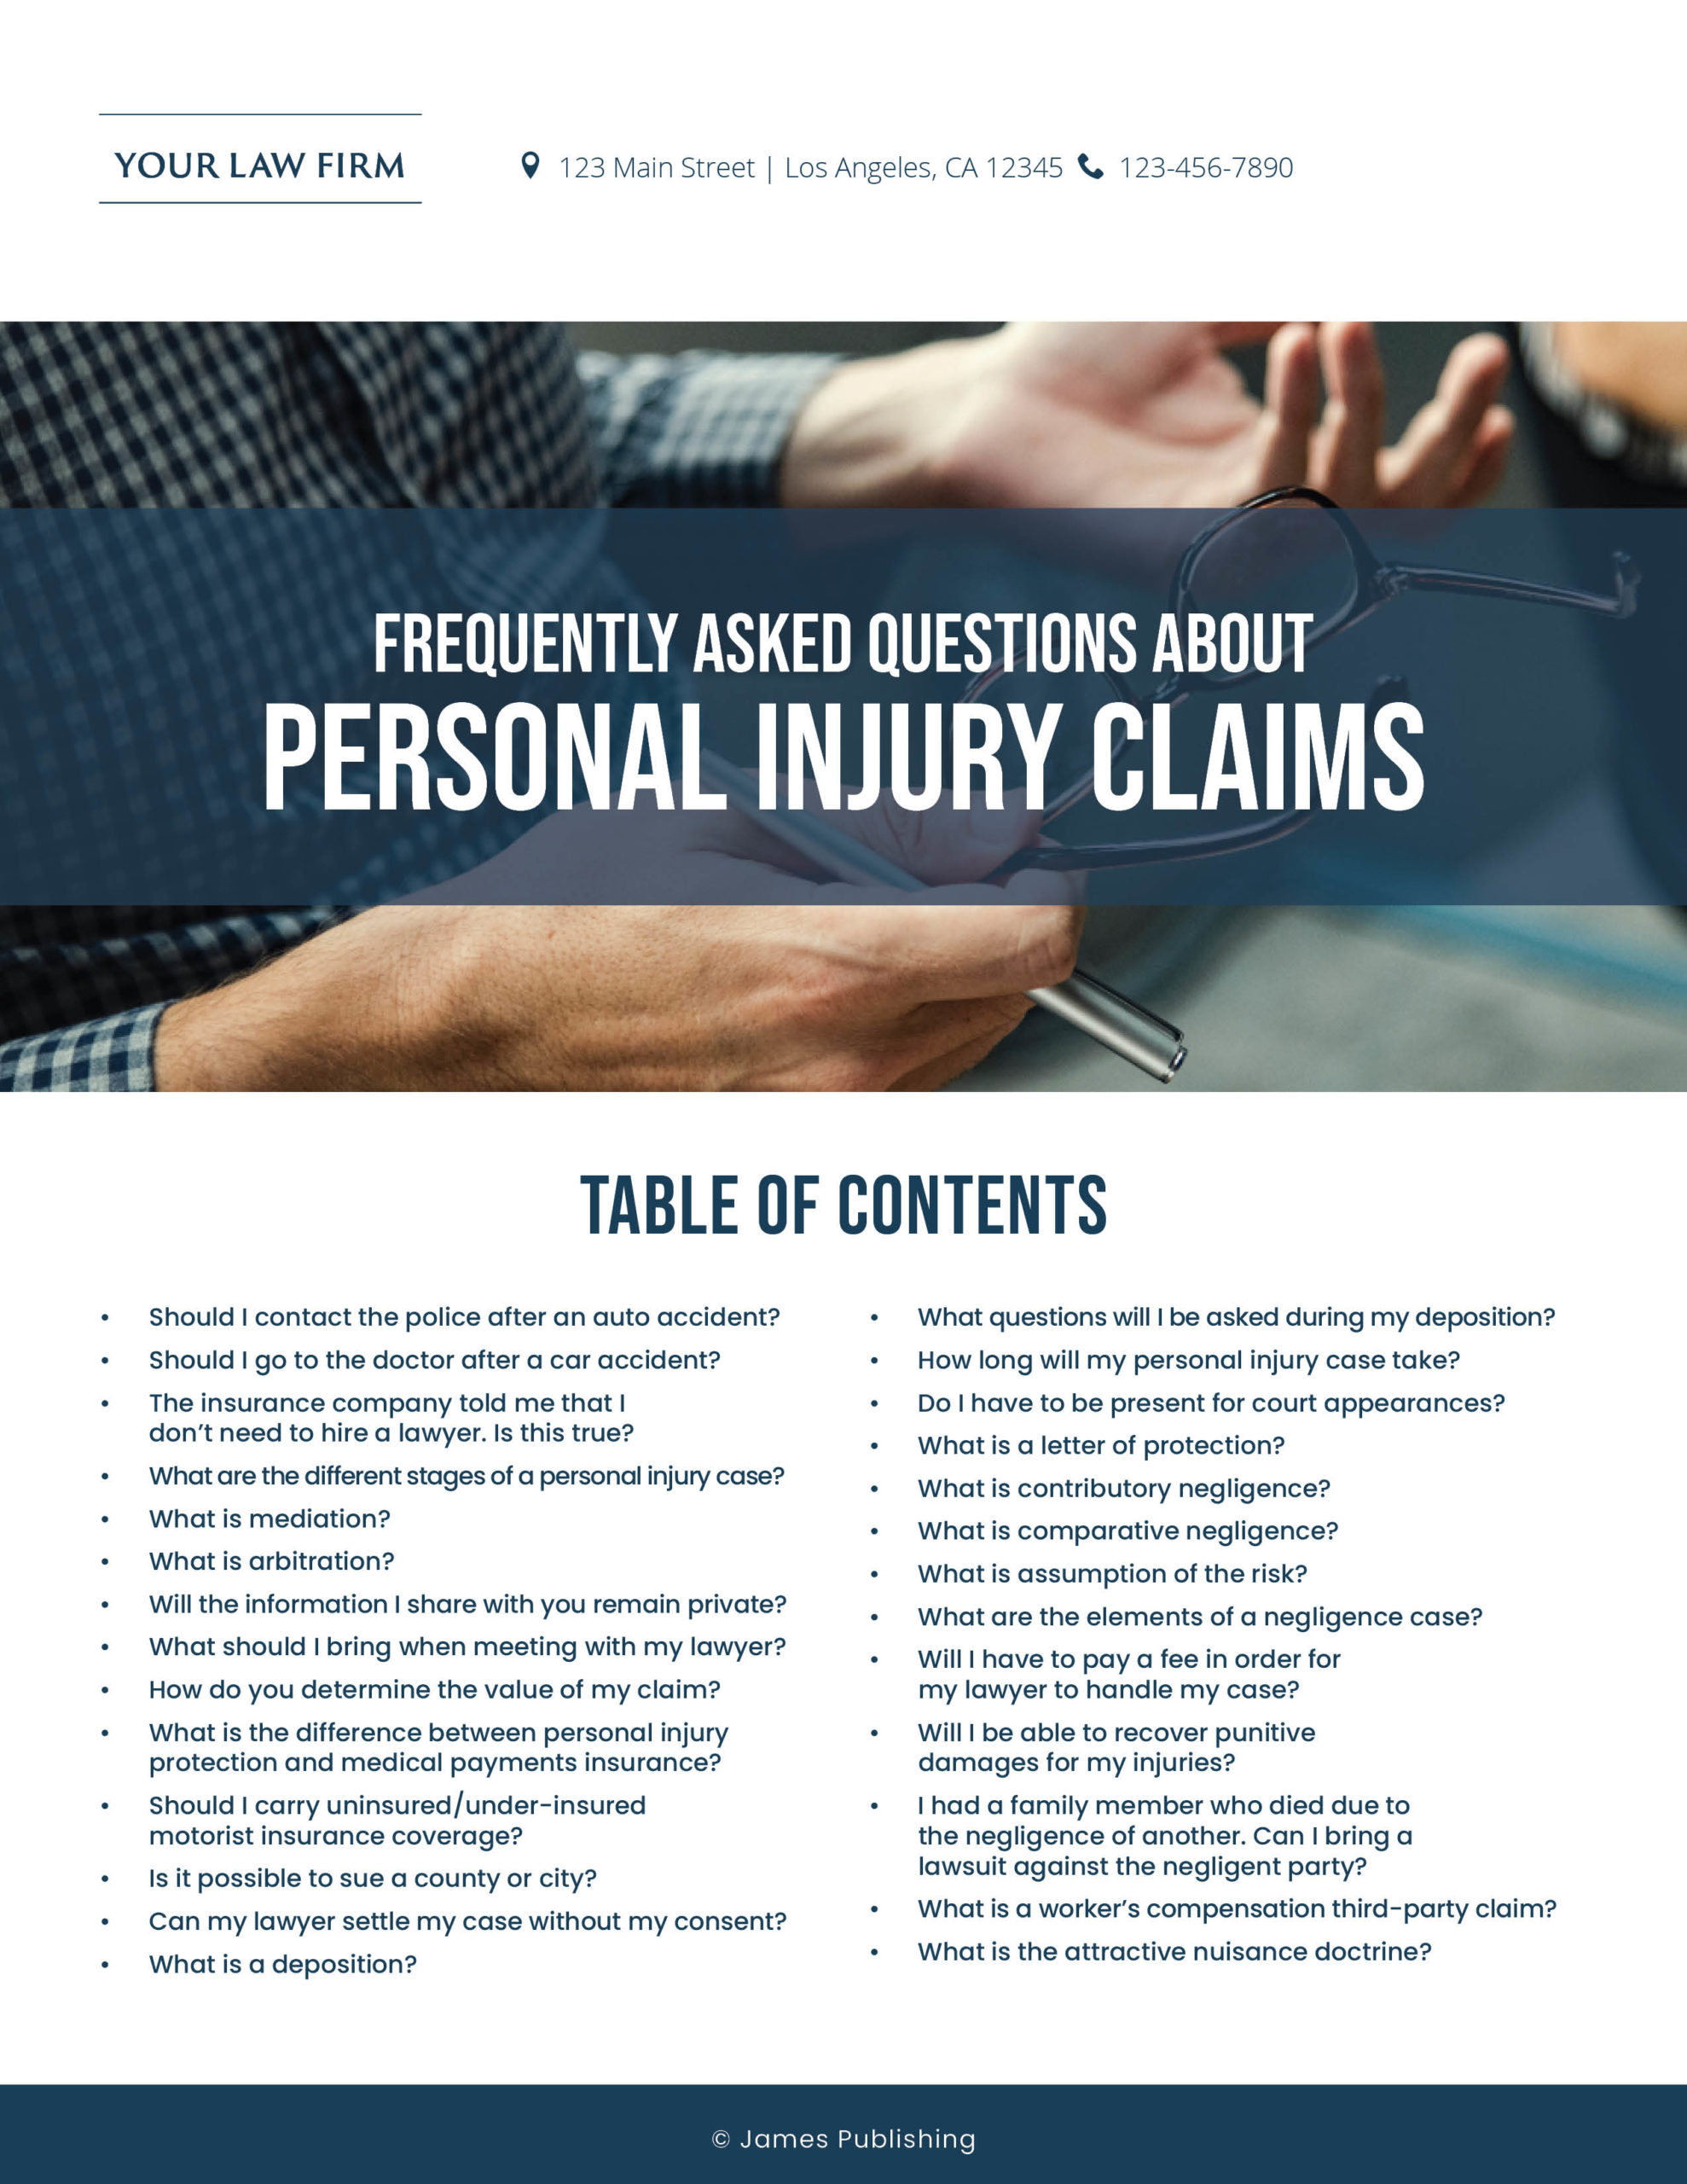 PI-01 Frequently Asked Questions About Personal Injury Claims